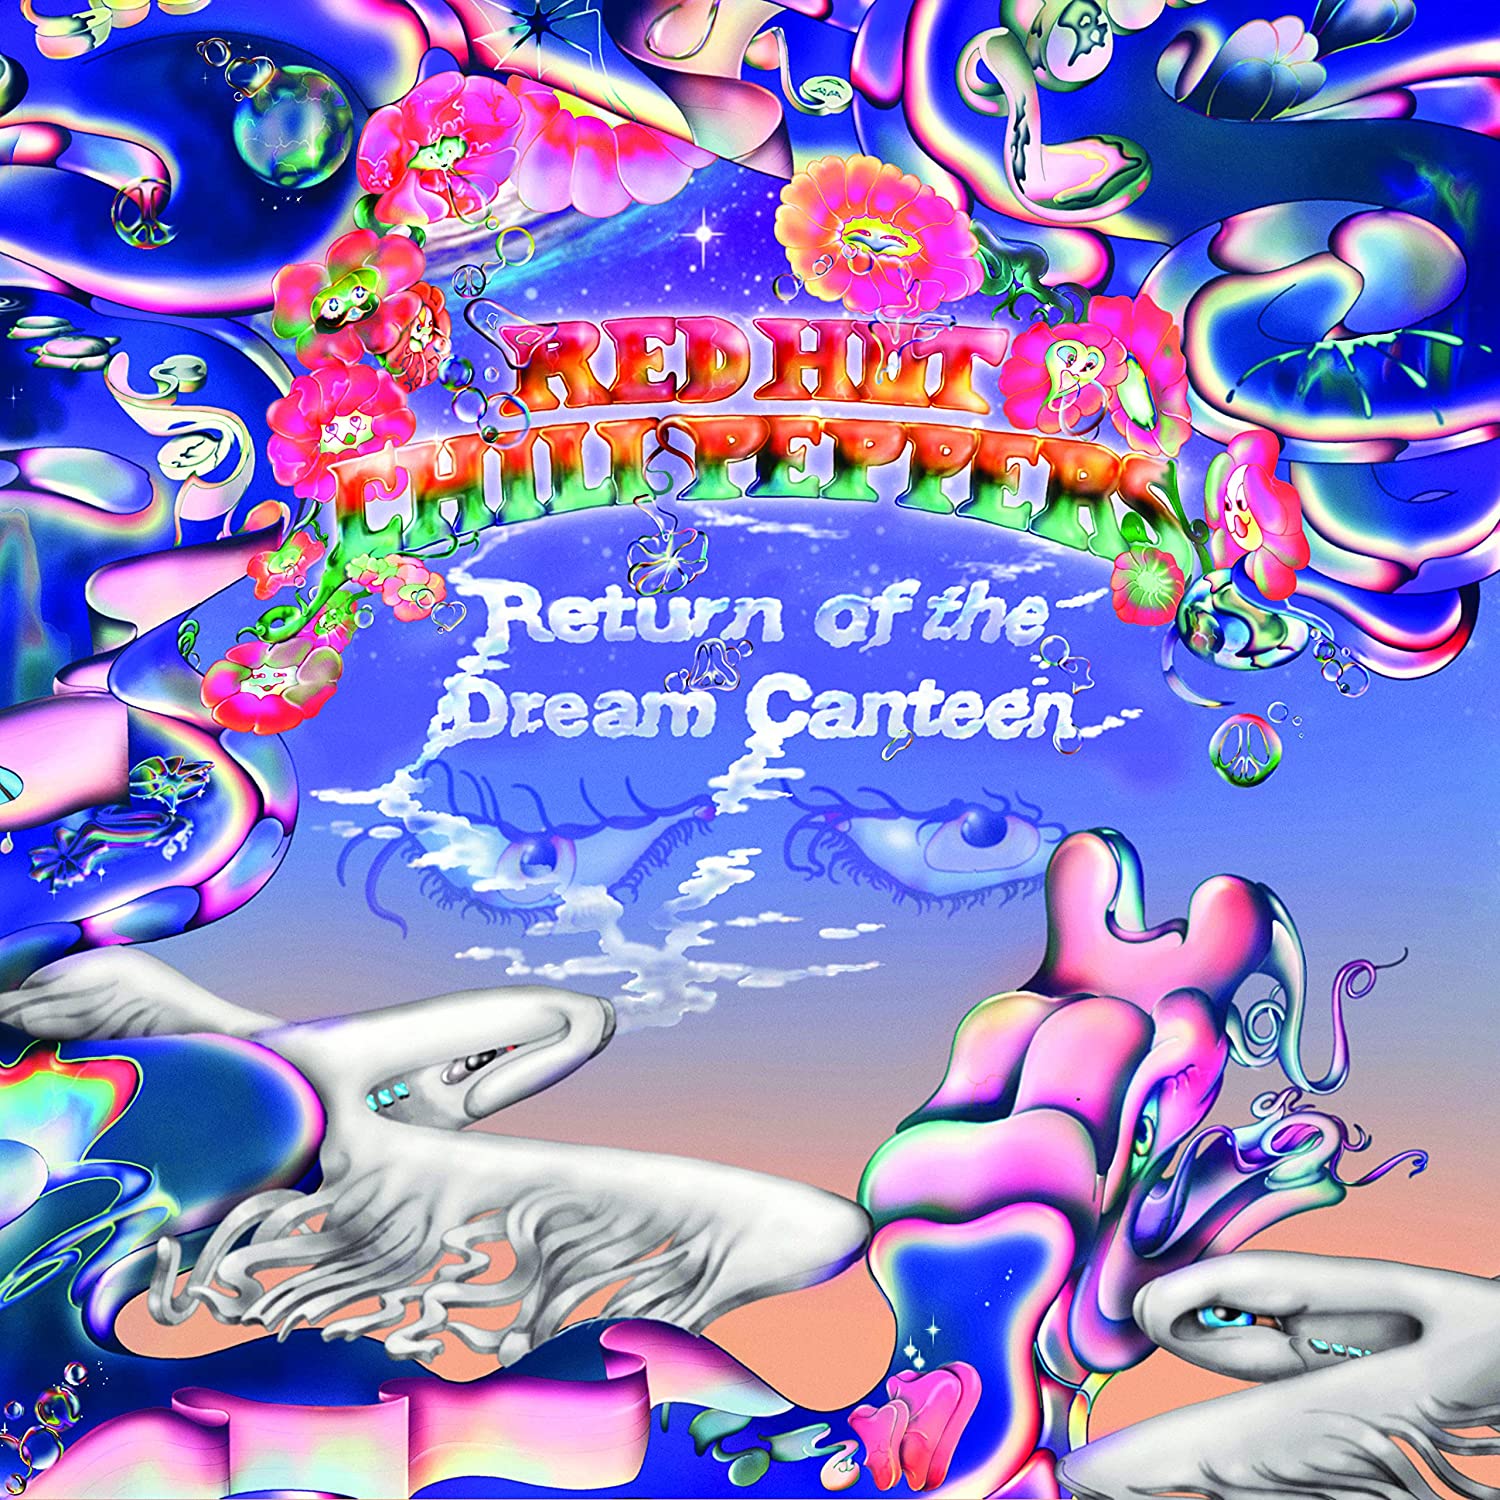 Album: Red Hot Chili Peppers - Return of the Dream Canteen review